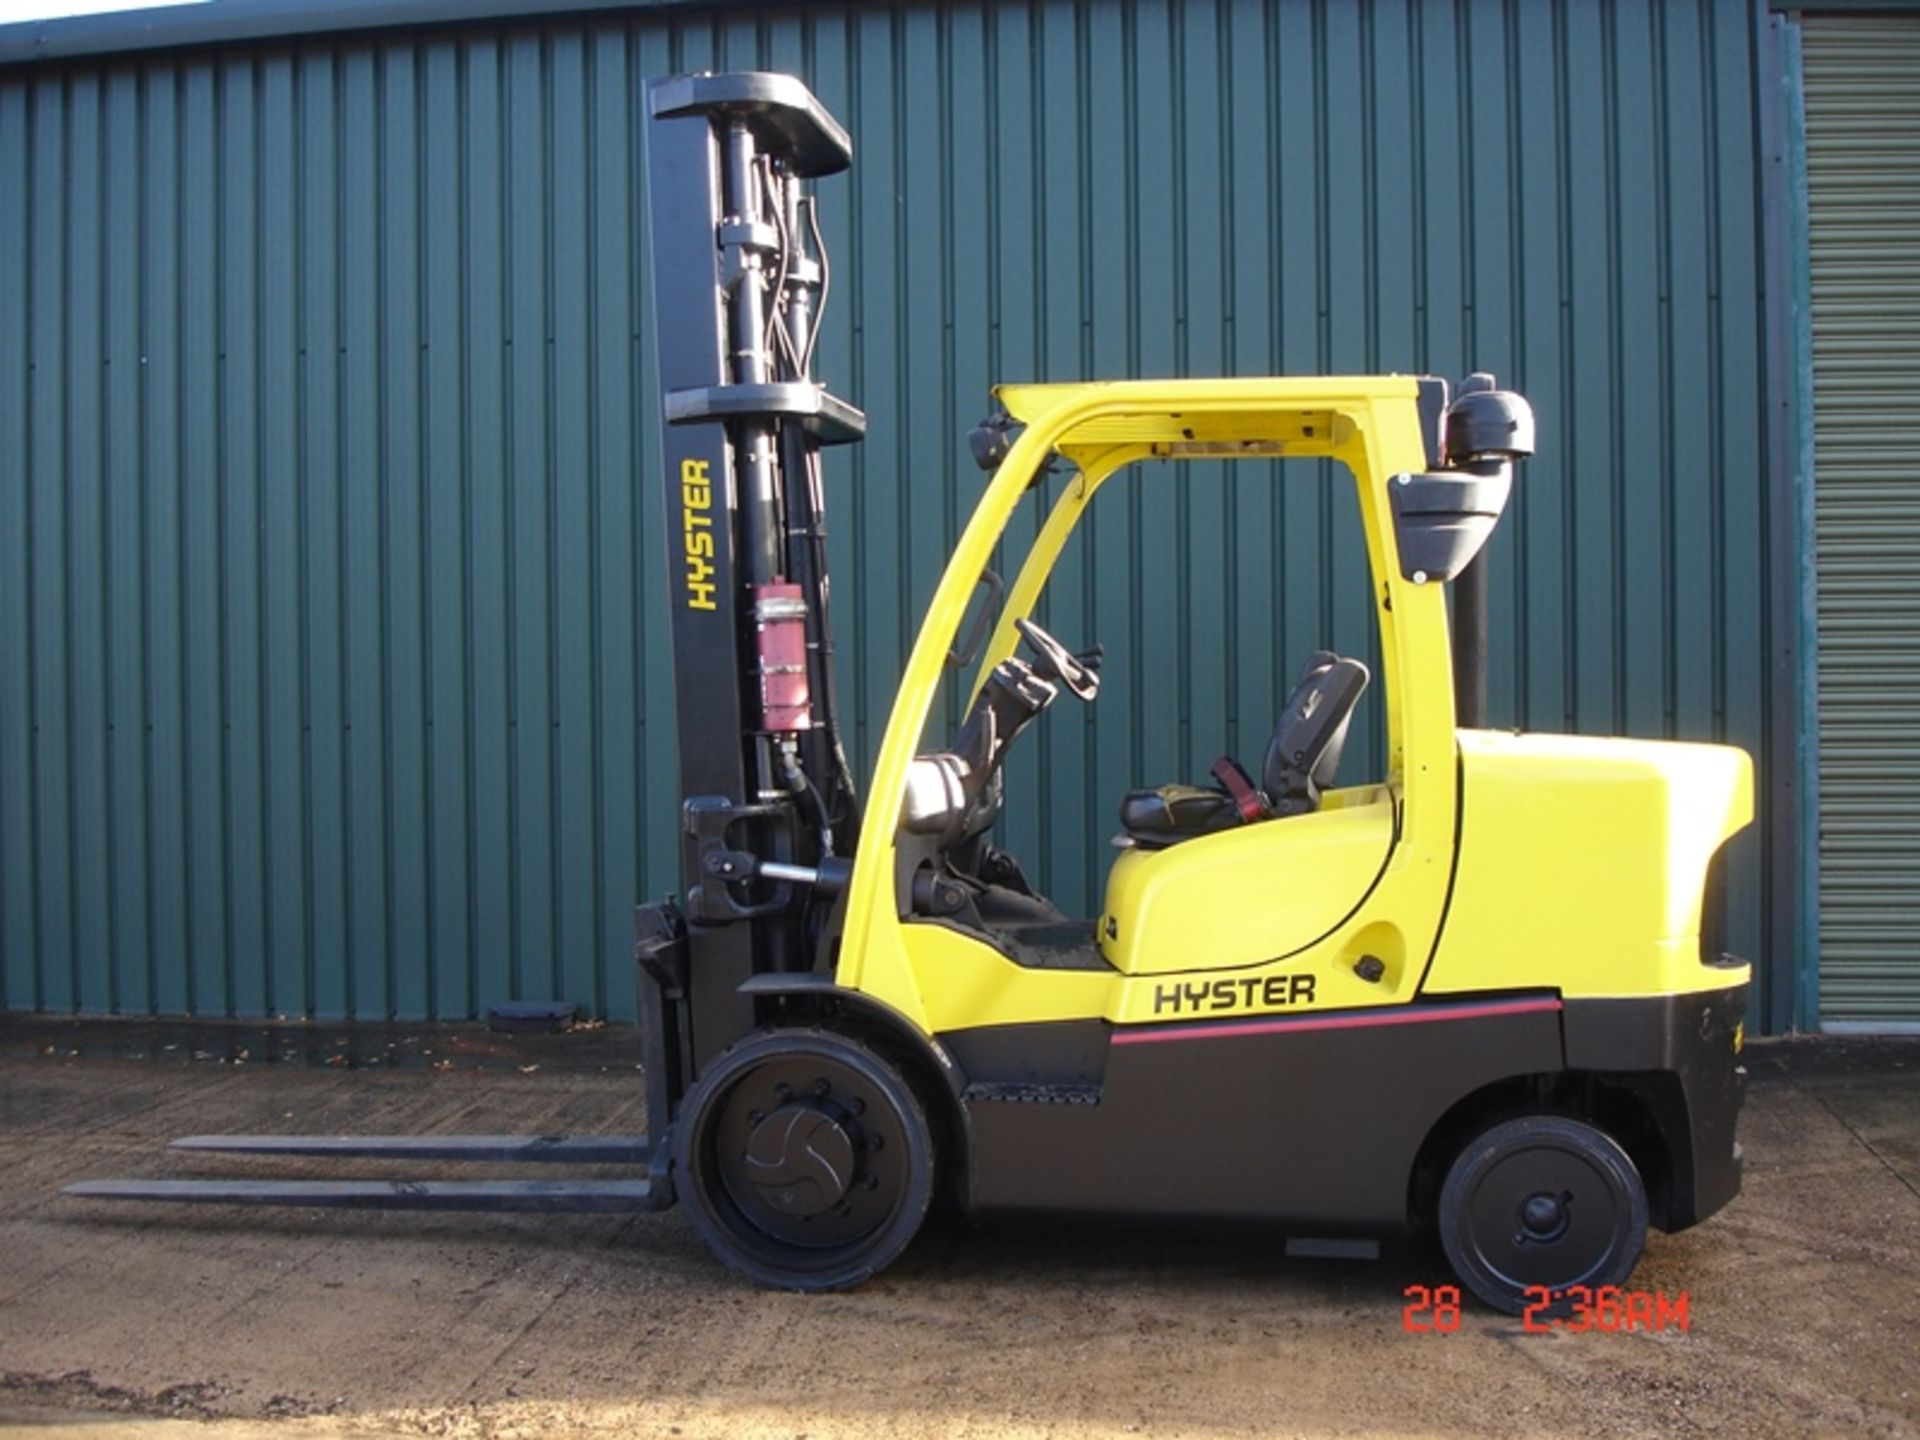 HYSTER COMPACT 7 TON FORKLIFT